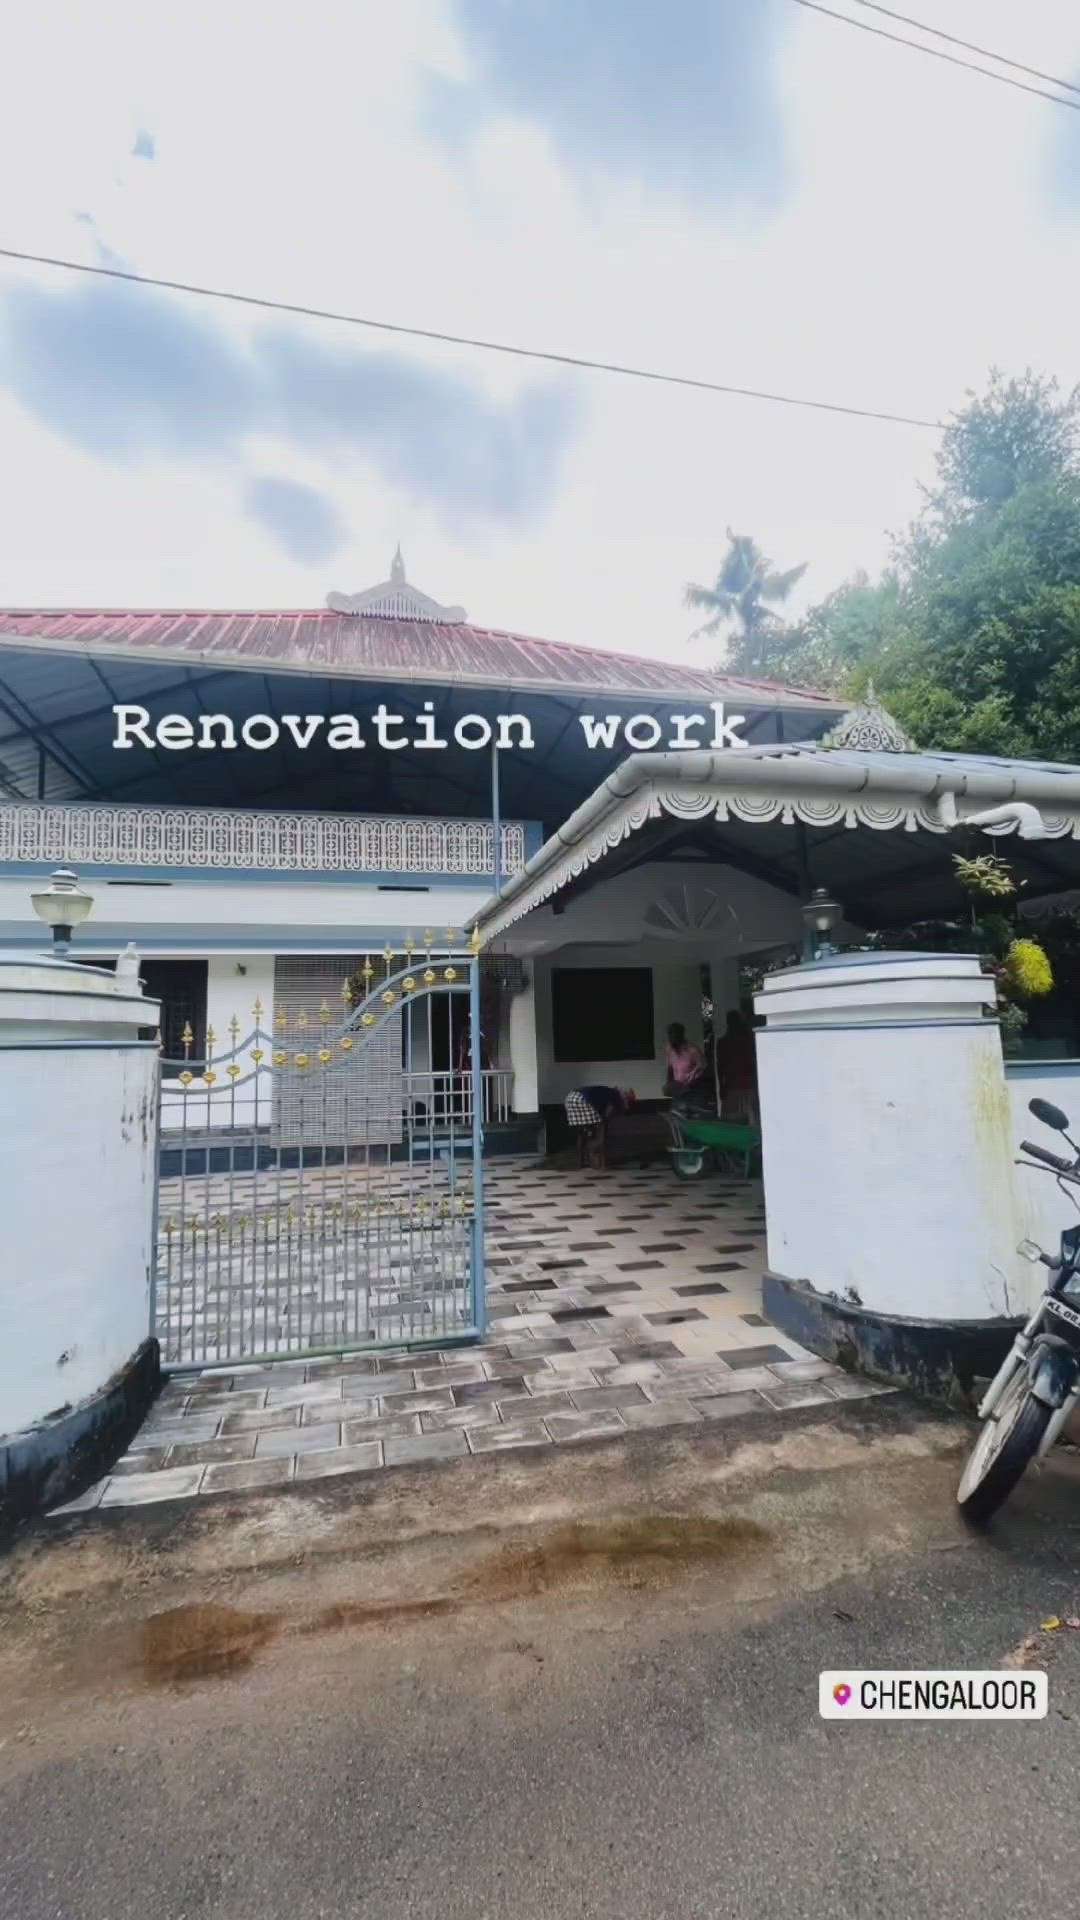 Renovation work of 1500 sqrft House in Nandipulam..By increasing room size  rearranging the old pattern of the House as per the requirements of the Clients. Upgraded the interior and exterior of the Building to  contemporary pattern.

location : nandipulam
client : livin Wilson
.
.
.
.
#koloapp #trendig #HouseRenovation #facelifting #geohabbuilders #geohab #Thrissur #contemporary #HouseDesigns